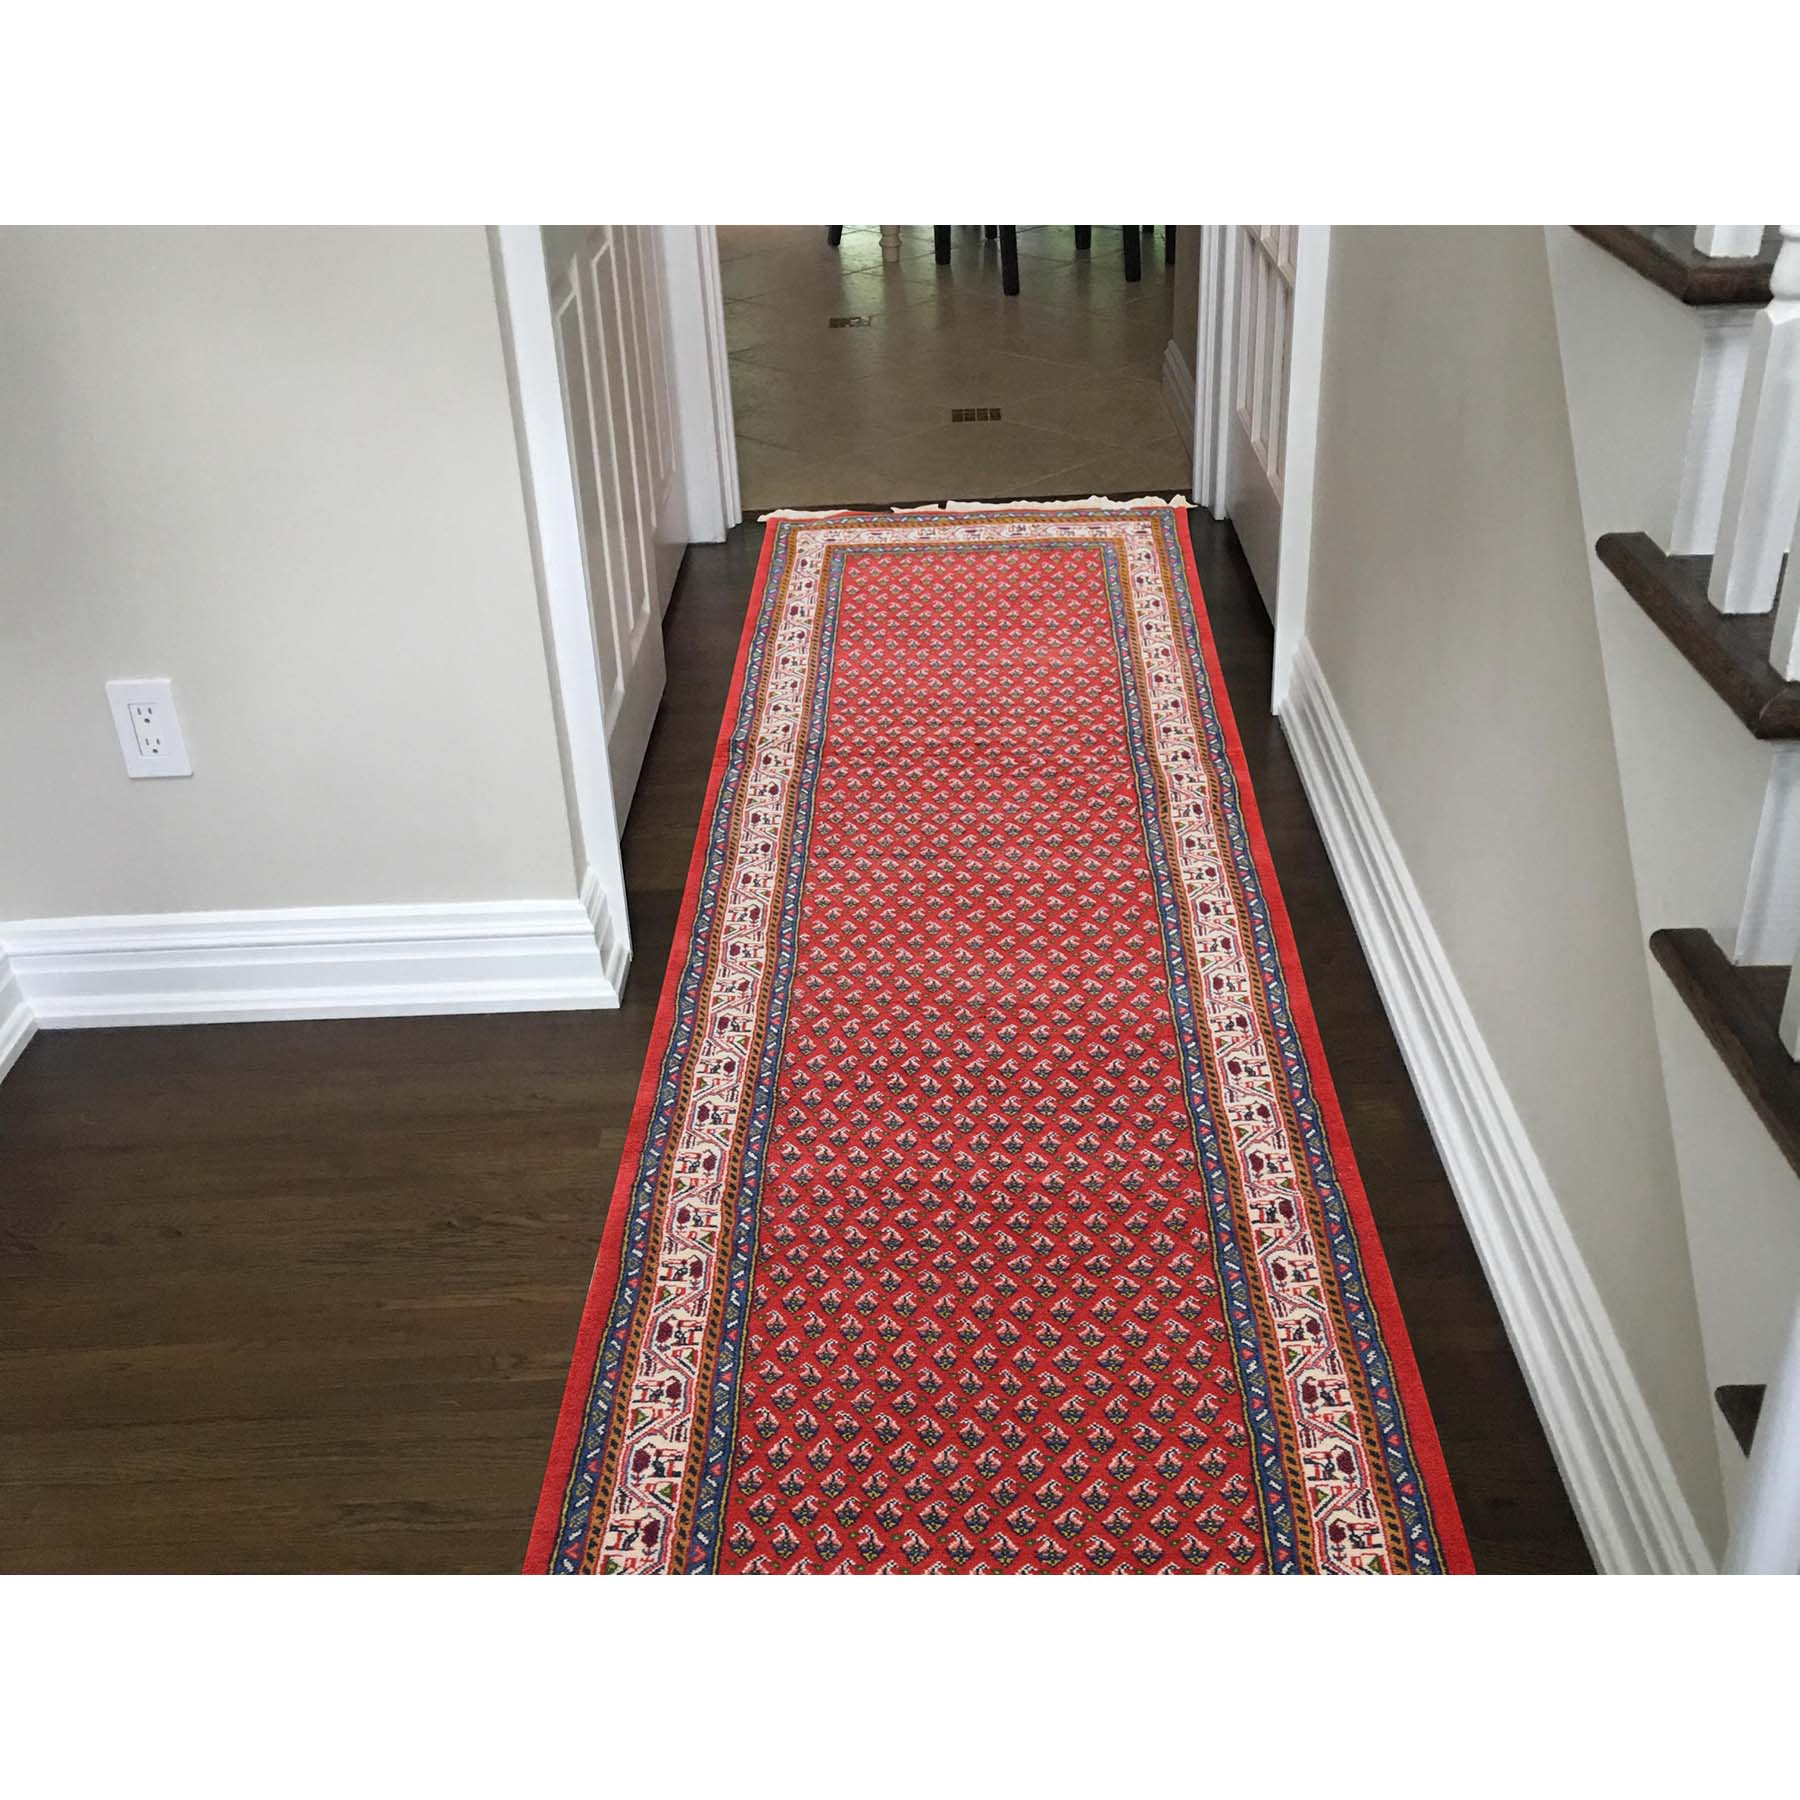 2-7 x10-4  Red New Persian Seraband Runner Pure Wool Hand-Knotted Oriental Rug 